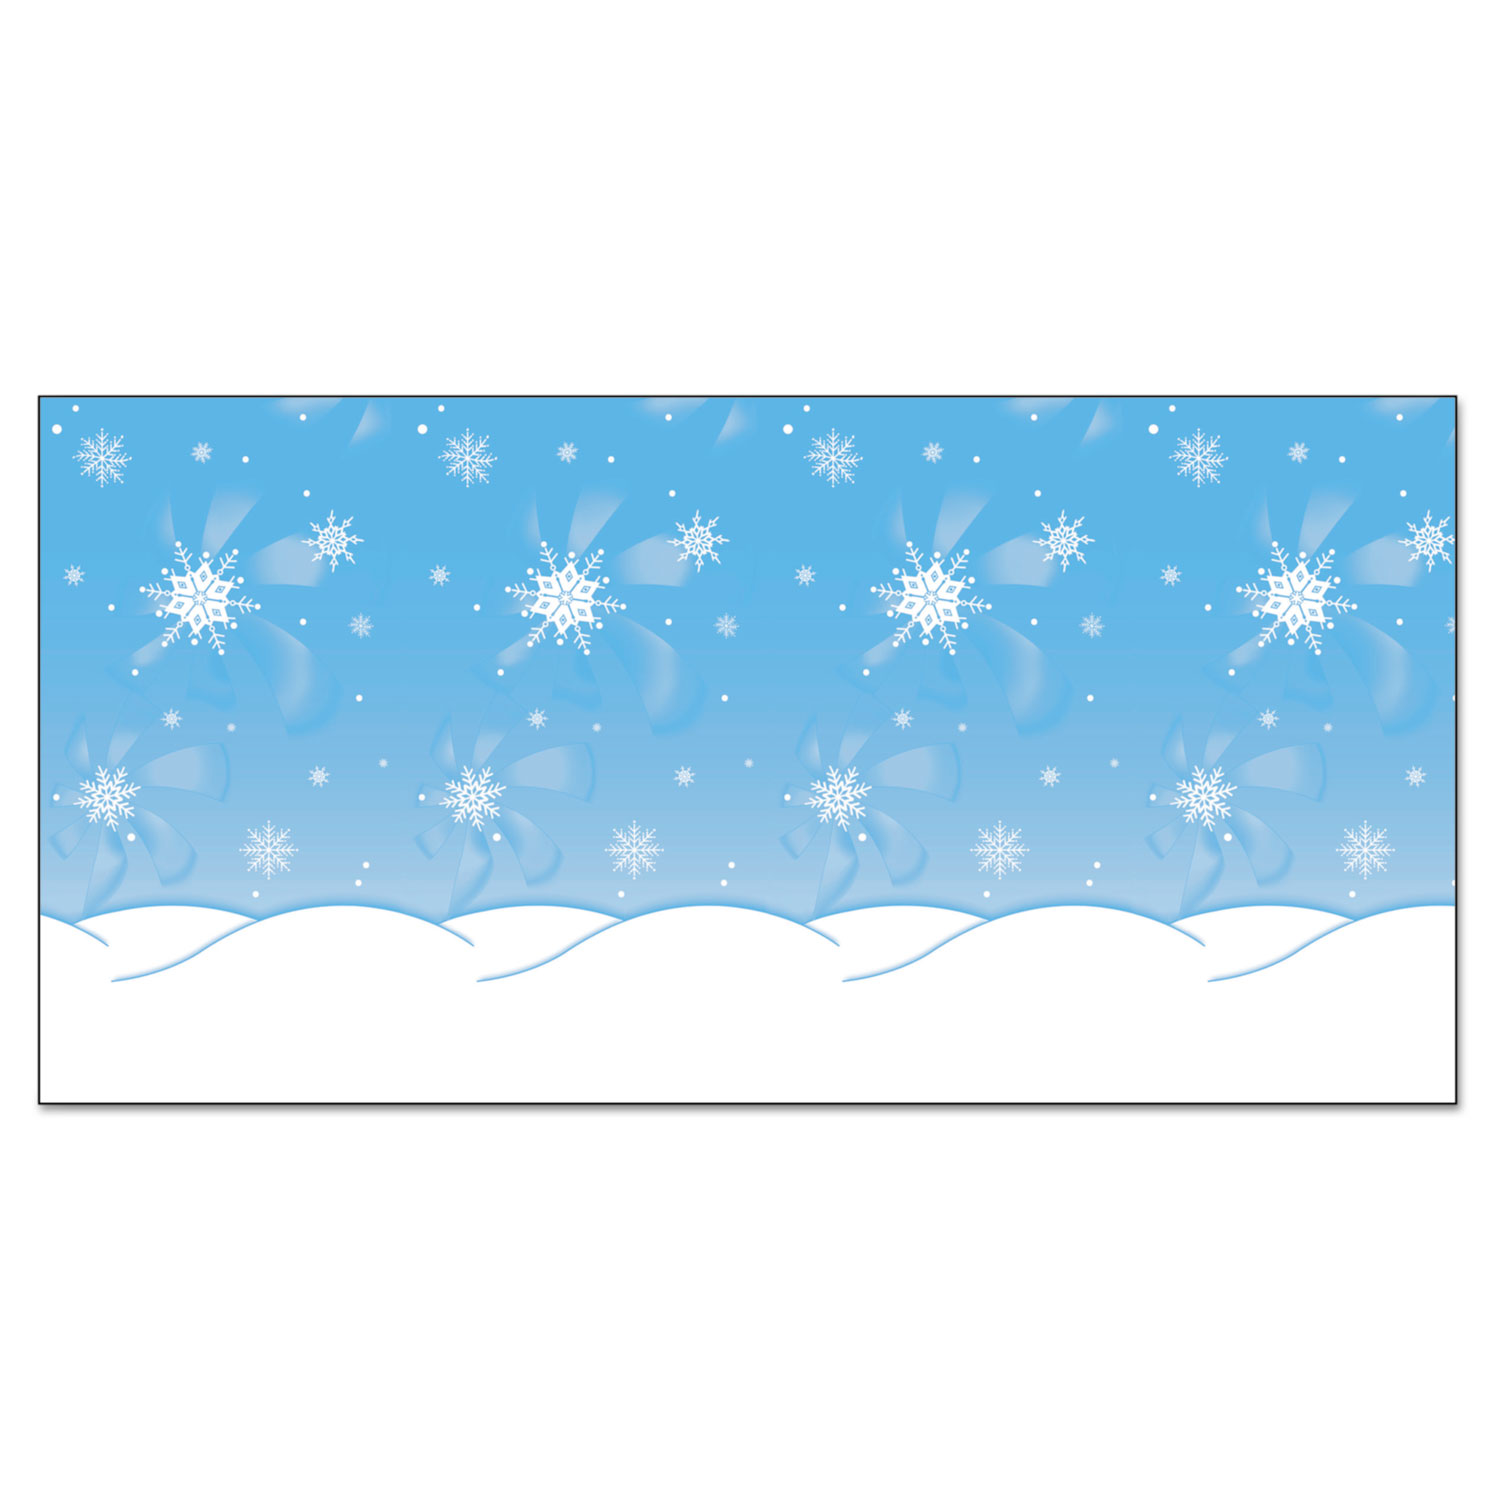  Pacon 0056385 Fadeless Designs Bulletin Board Paper, Winter Time Scene, 48 x 50 ft. (PAC56385) 